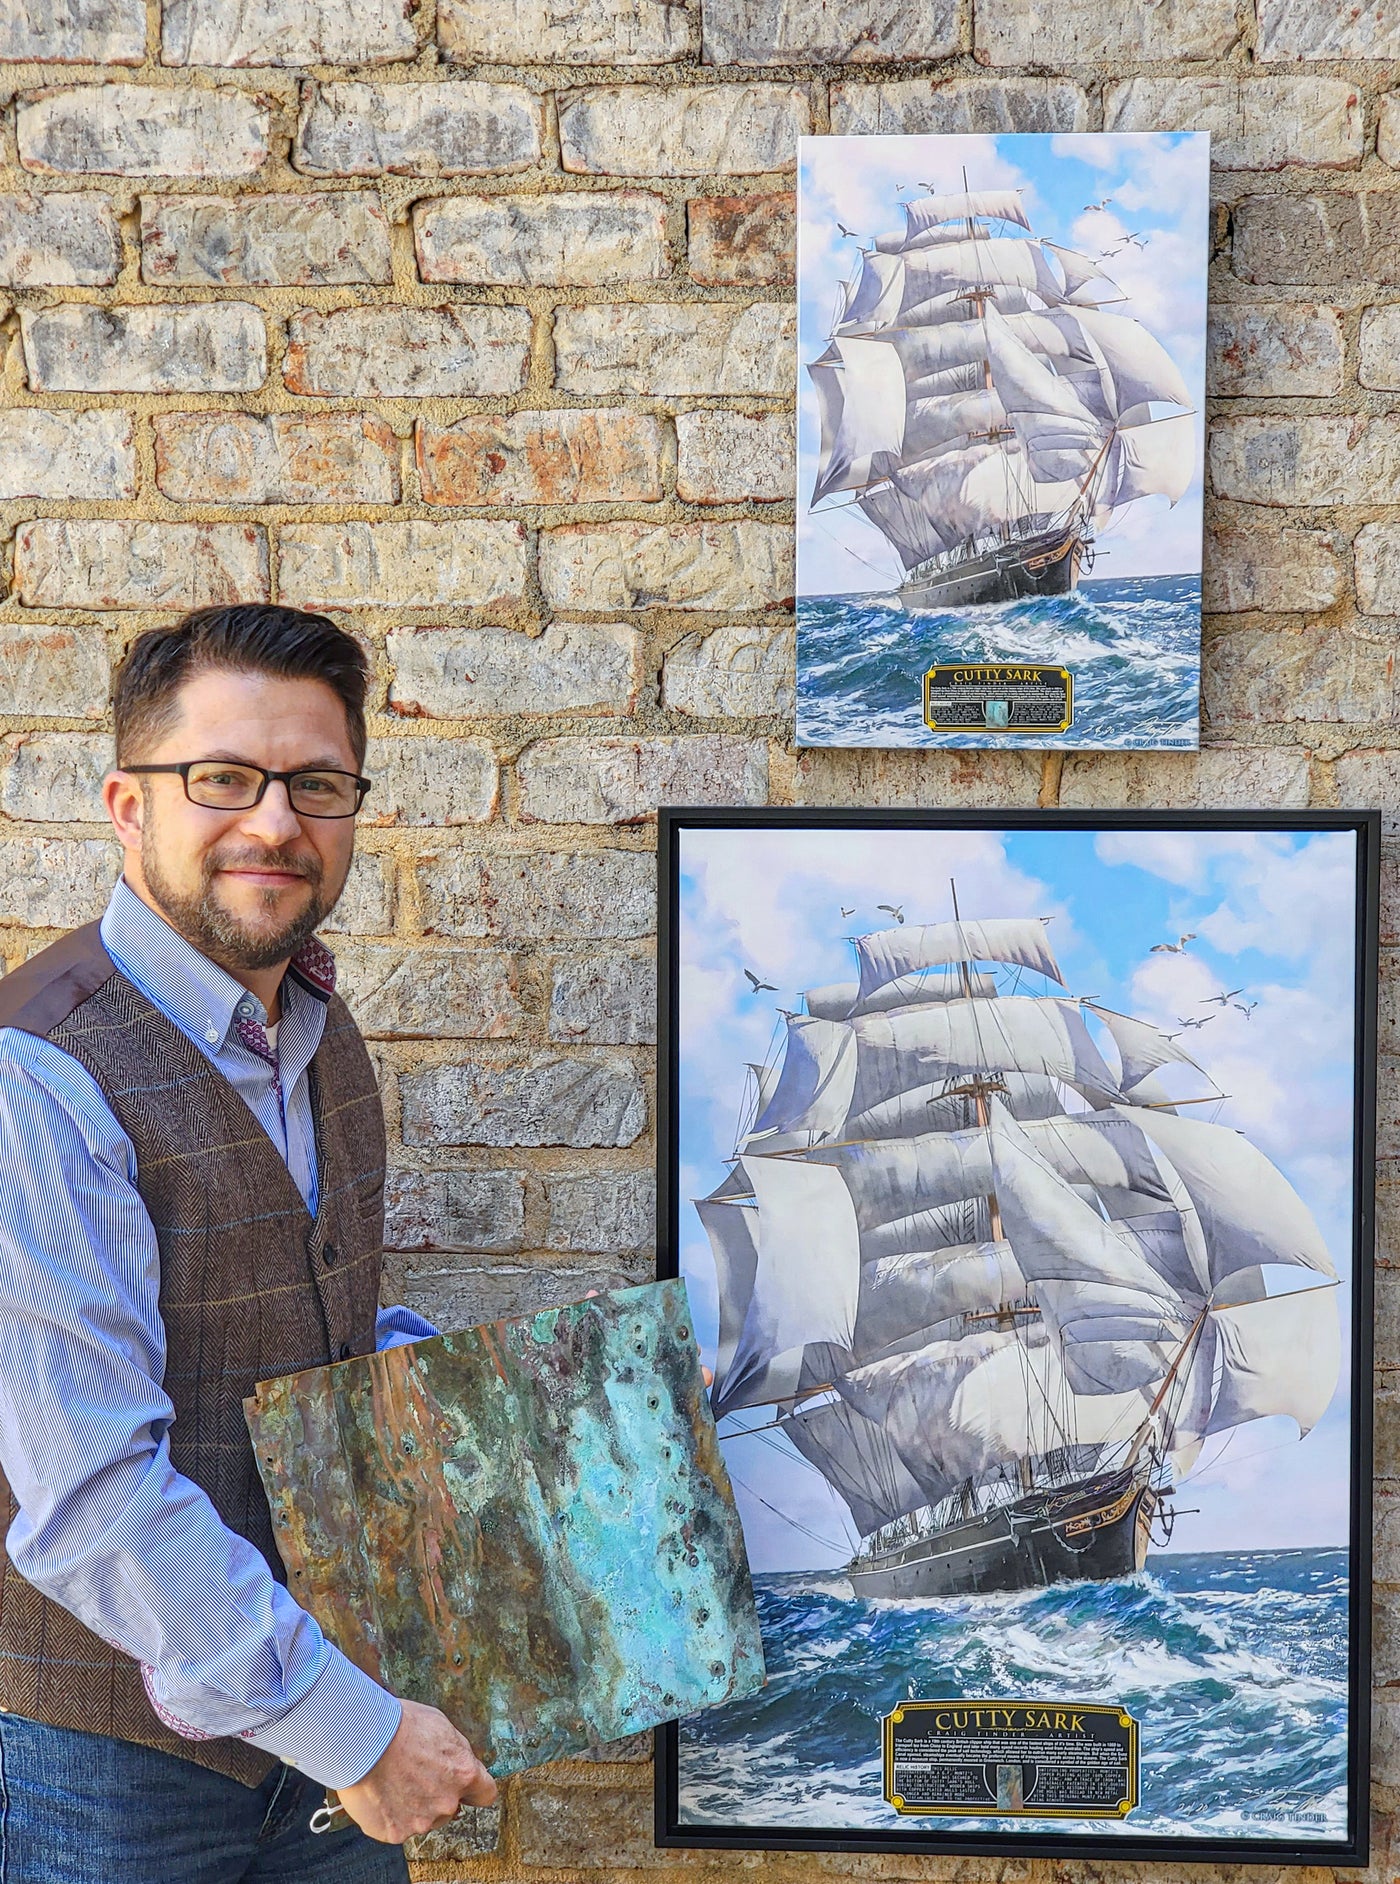 Cutty Sark - Clipper Ship Maritime Art-Art Print-Aces In Action: The Workshop of Artist Craig Tinder